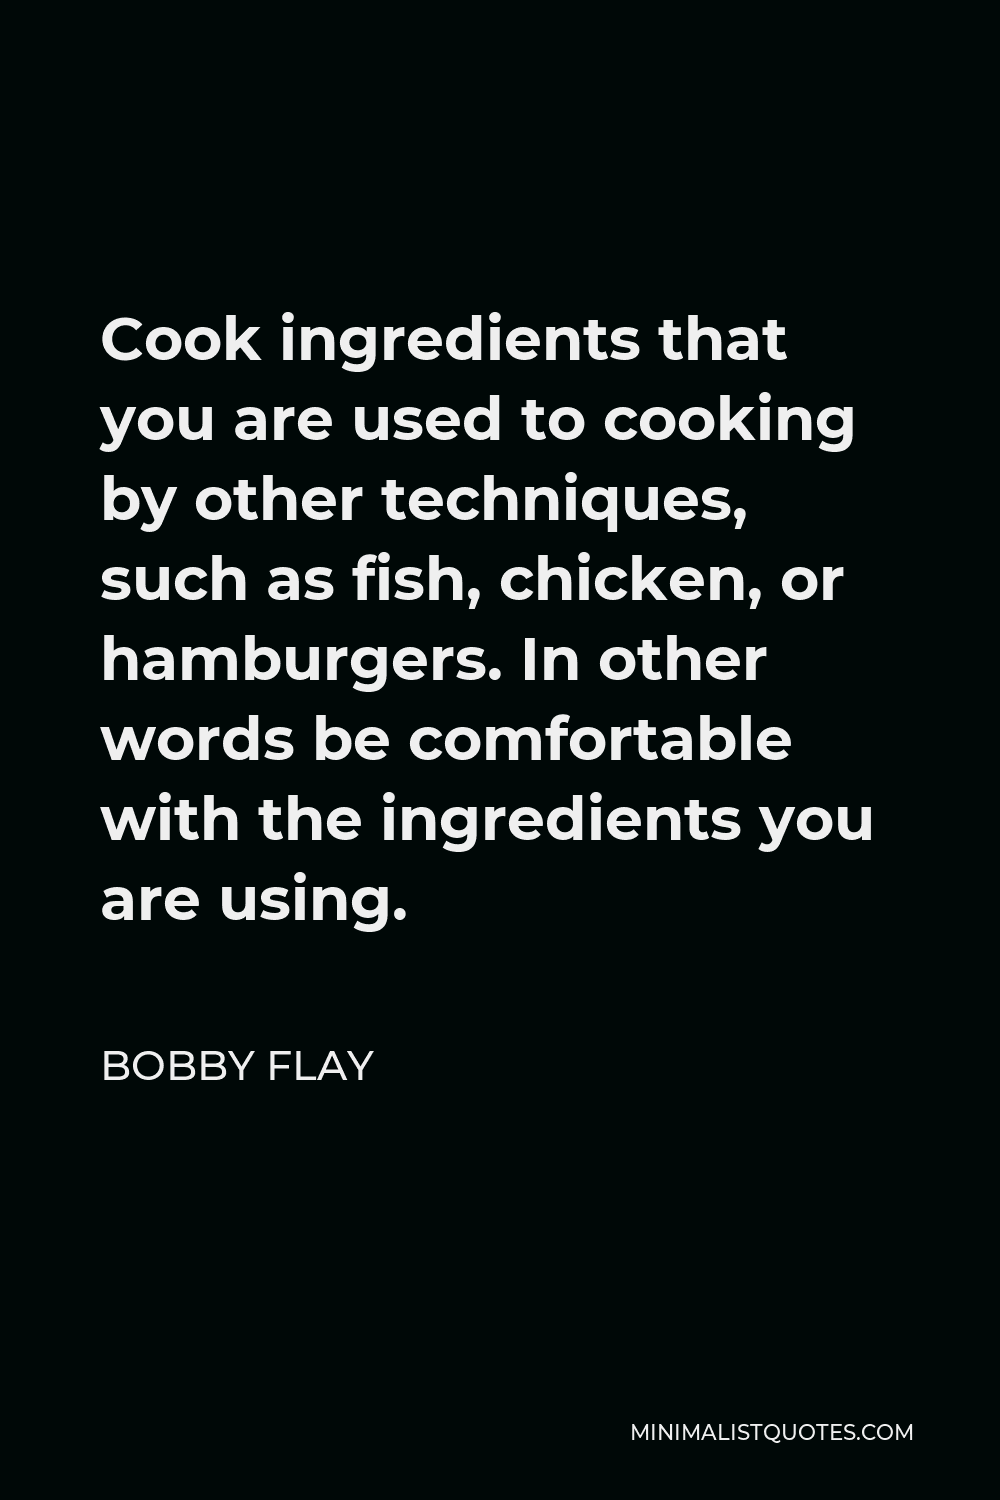 Bobby Flay Quote - Cook ingredients that you are used to cooking by other techniques, such as fish, chicken, or hamburgers. In other words be comfortable with the ingredients you are using.